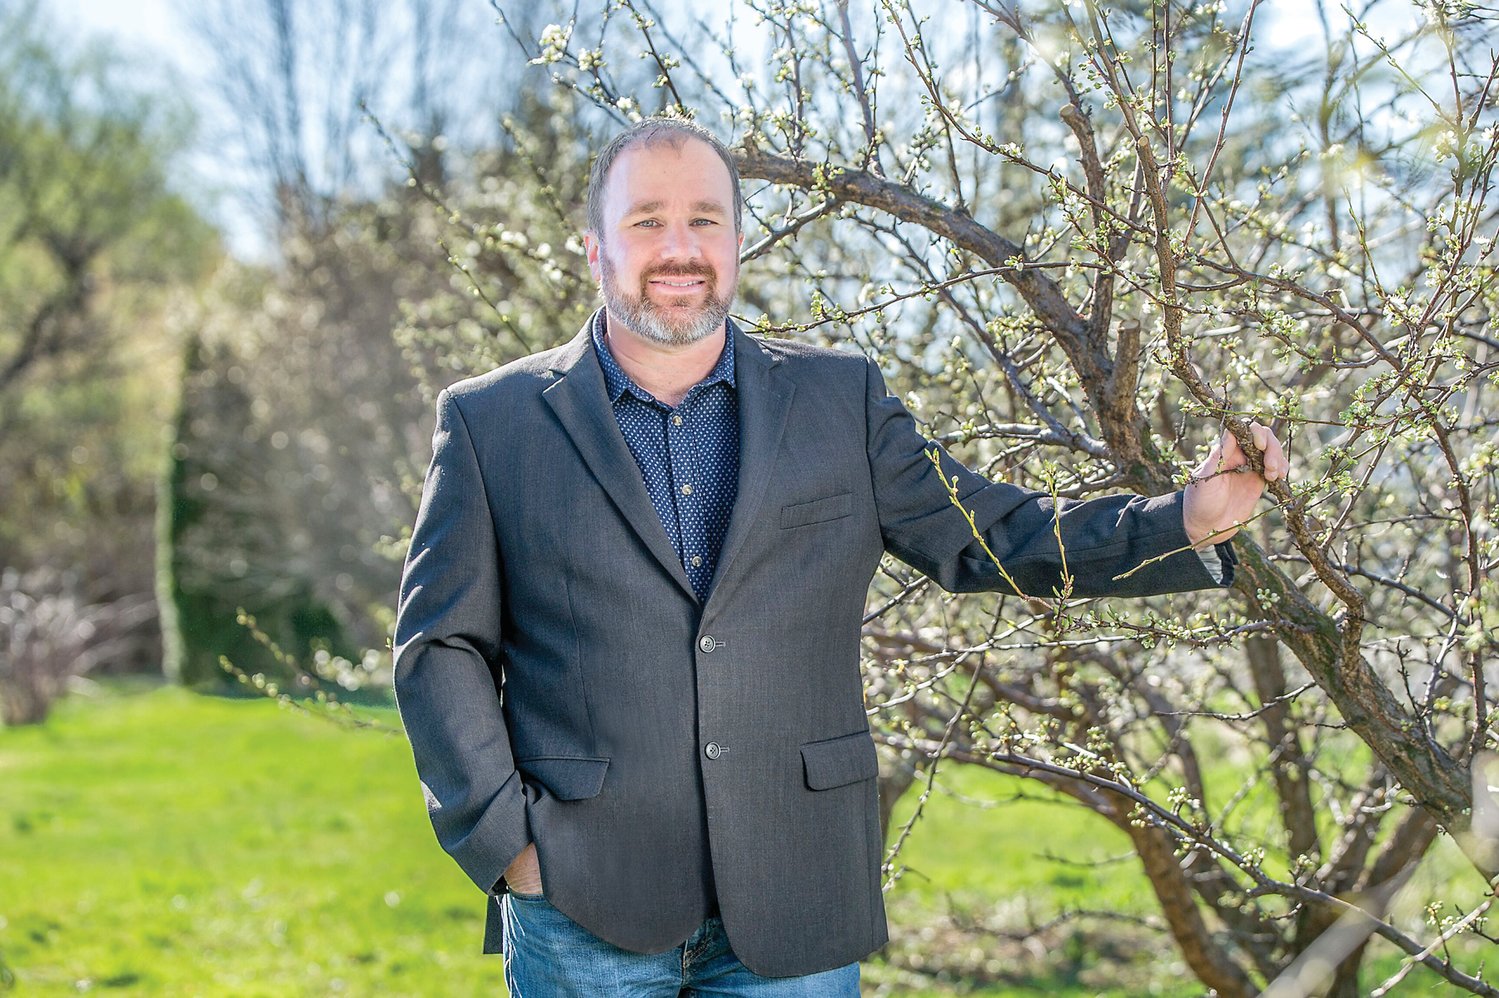 Caleb Torrice, owner of Tabora Farms, is running for supervisor in Hilltown Township.  Photograph by Chris Ruvo.